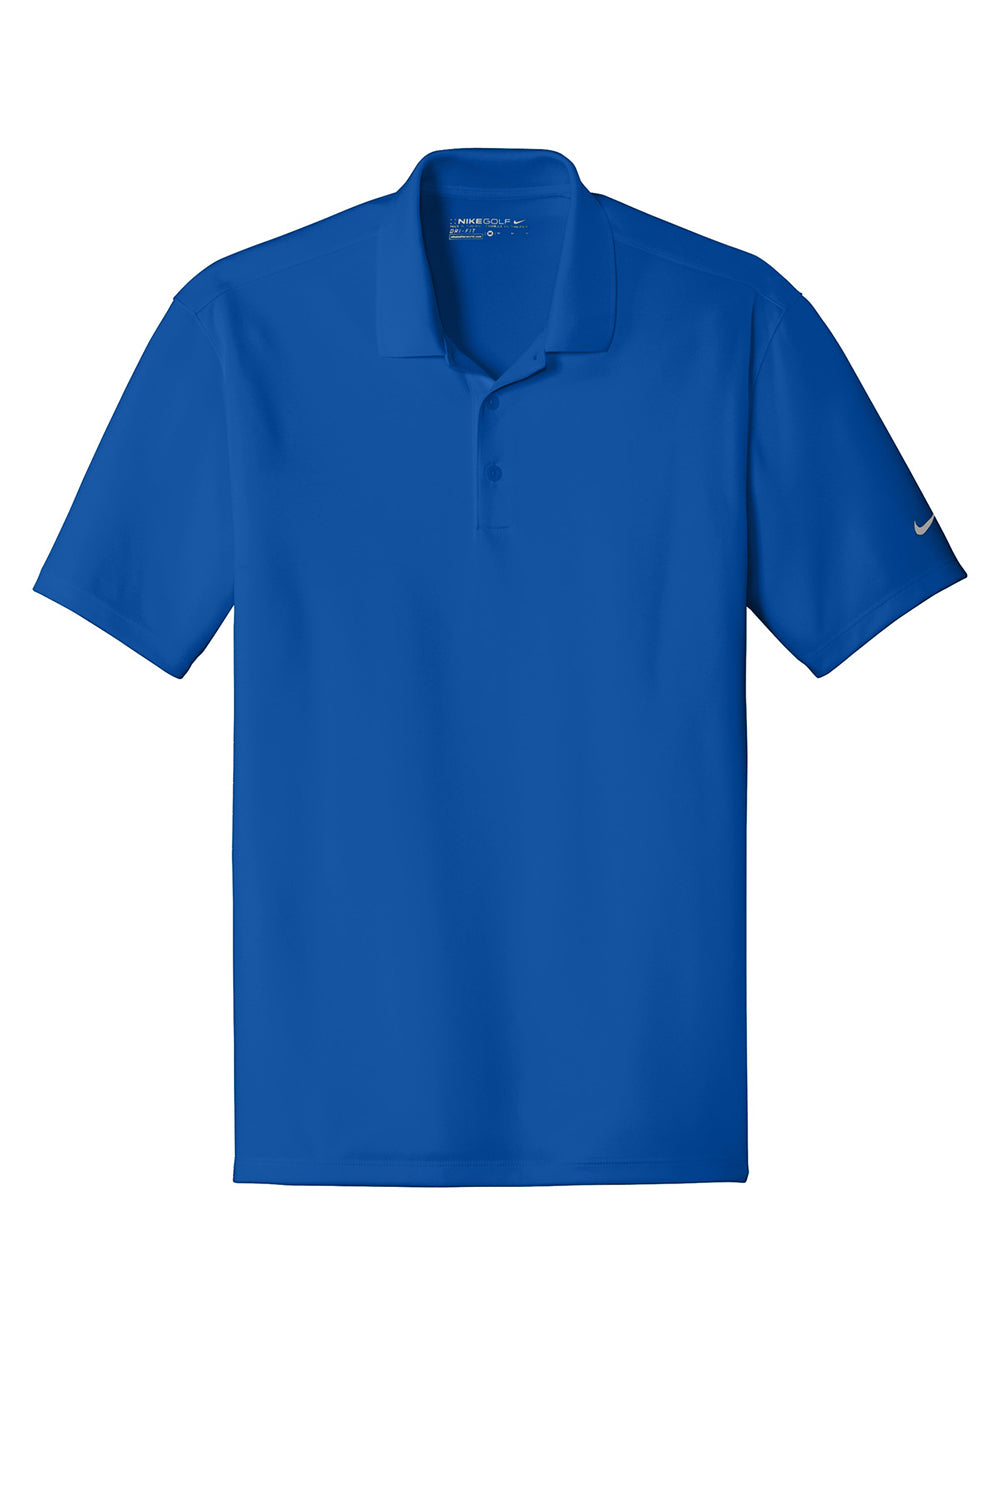 Nike 838956 Mens Players Dri-Fit Moisture Wicking Short Sleeve Polo Shirt Gym Blue Flat Front